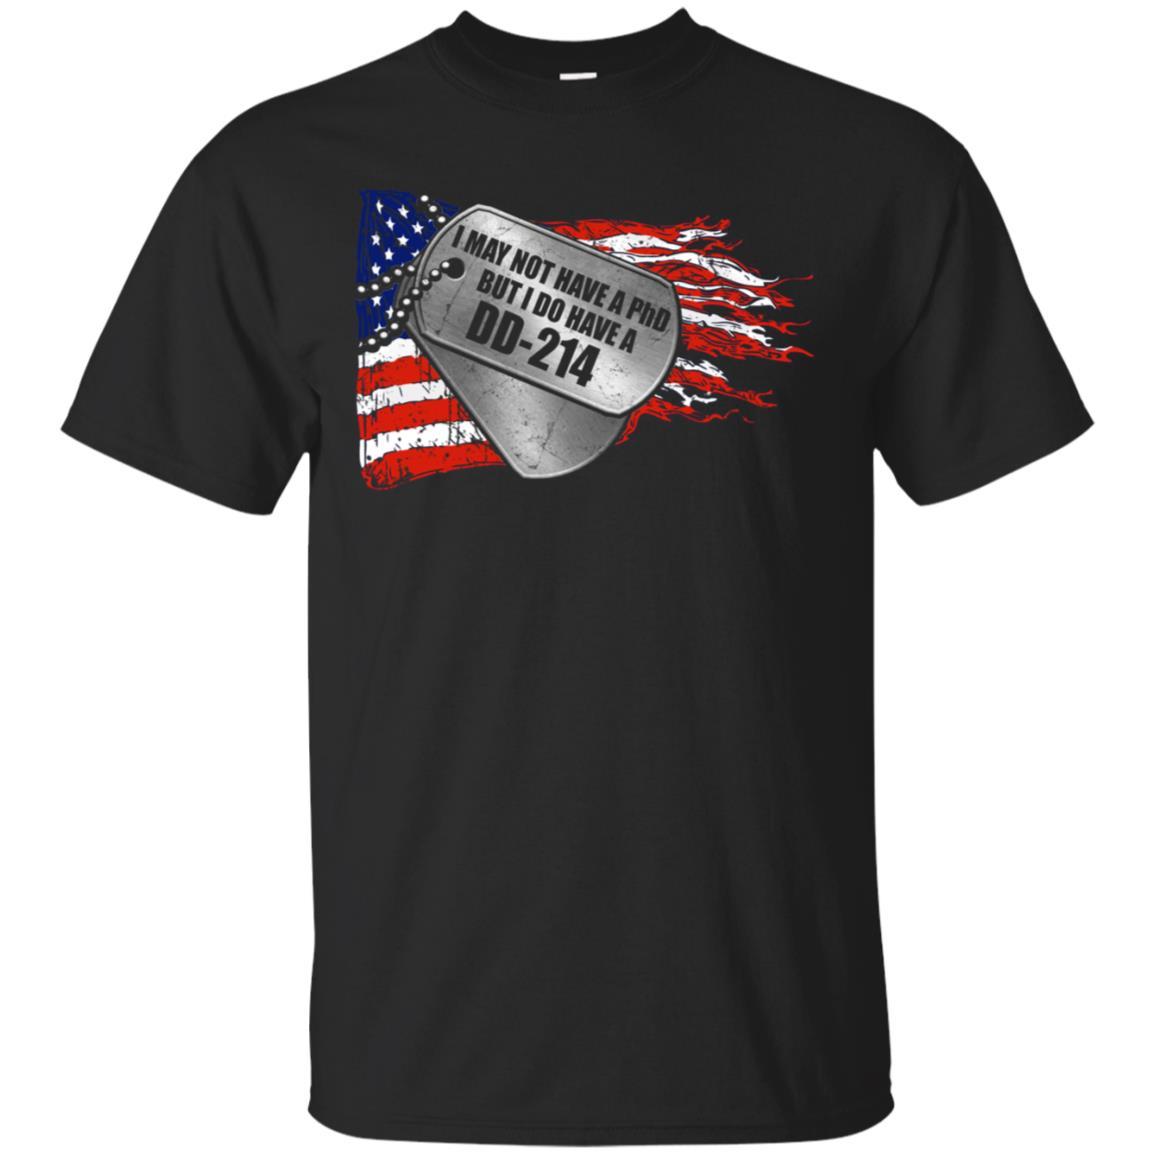 Military T-Shirt "I May Not Have A PhD But I Do Have A DD-214 Men On" Front-TShirt-General-Veterans Nation